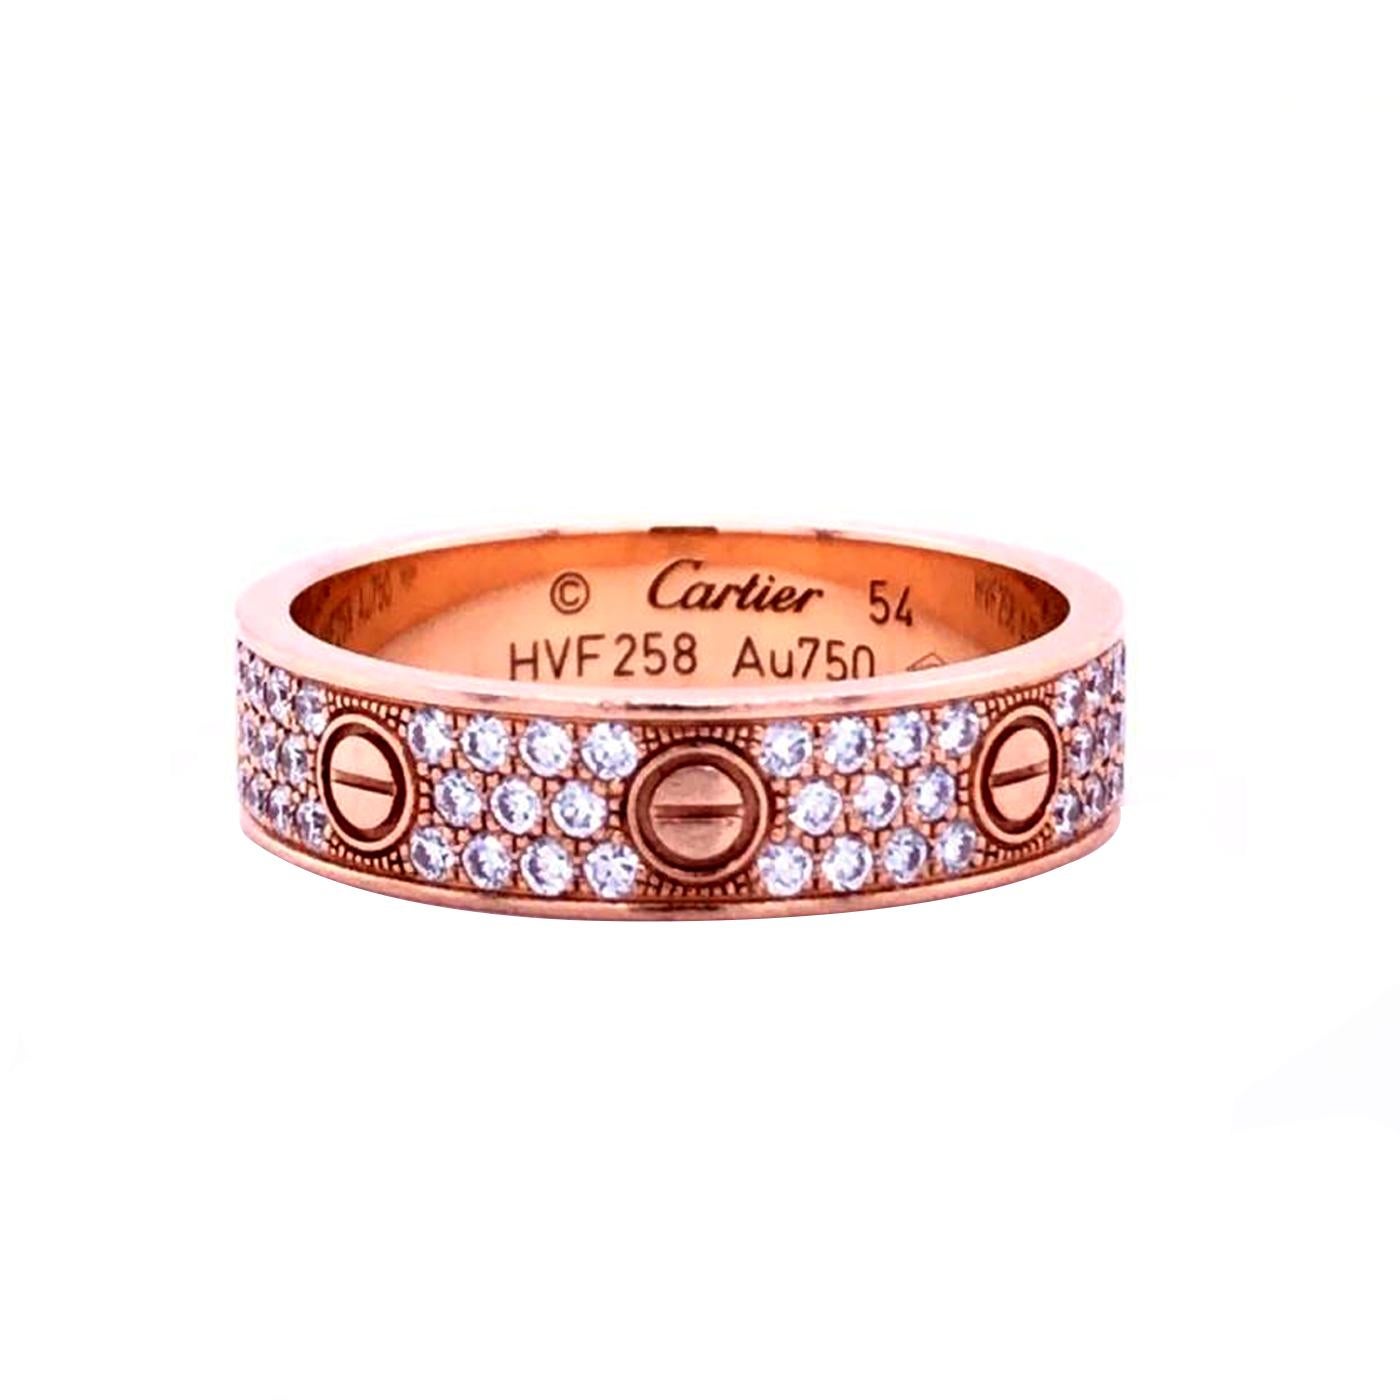 An 18k Rose gold Cartier diamond pave ring from the Love collection. The ring comprises of the iconic screw motifs displayed around the outer edges with 88 round brilliant cut diamonds totalling 0.31ct set between each screw motif. The ring measures